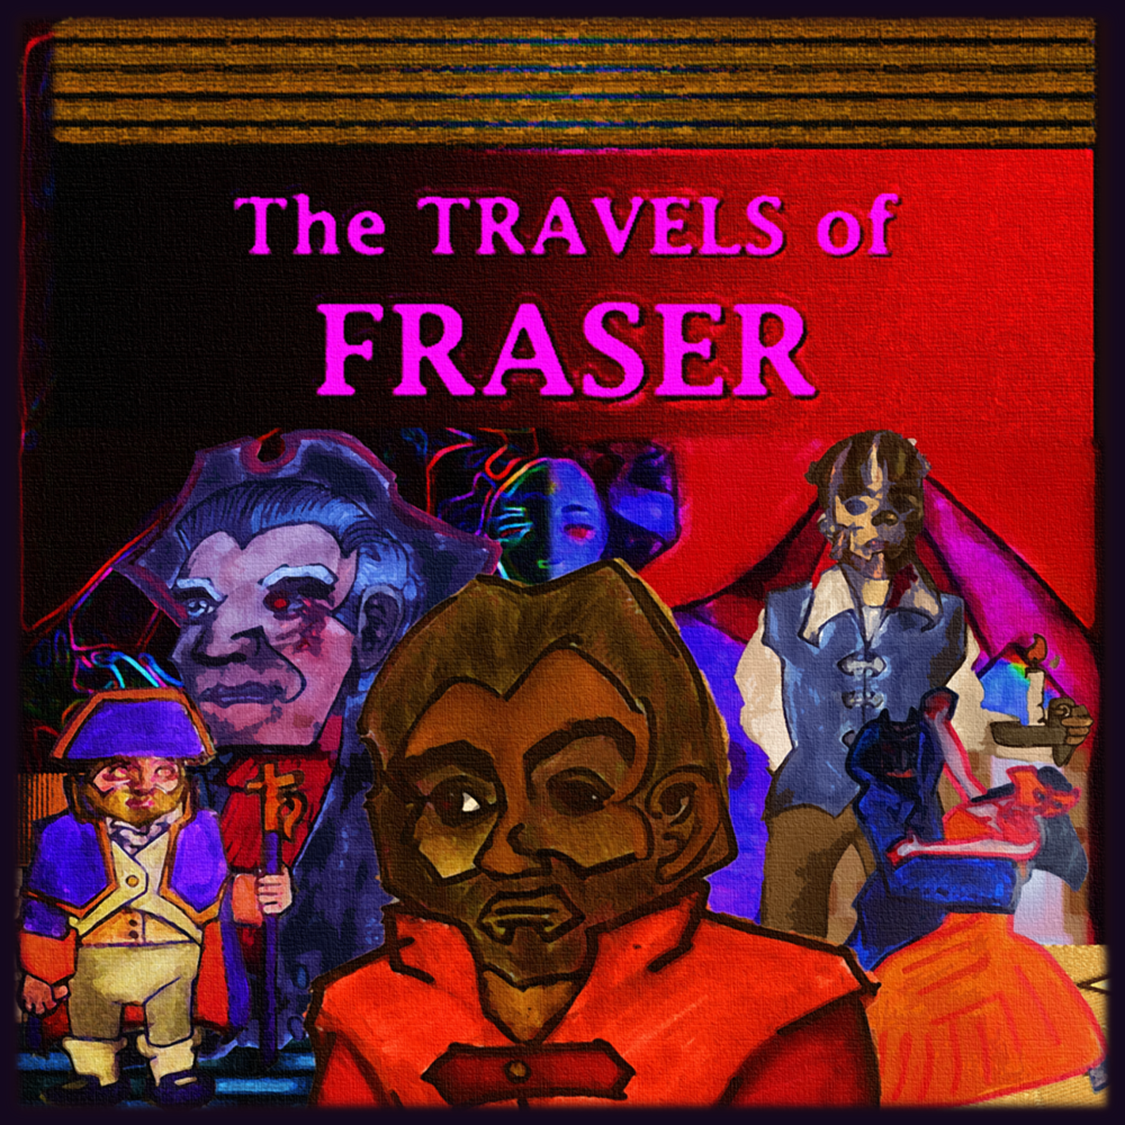 The Travels of Fraser: Demo 2.4.